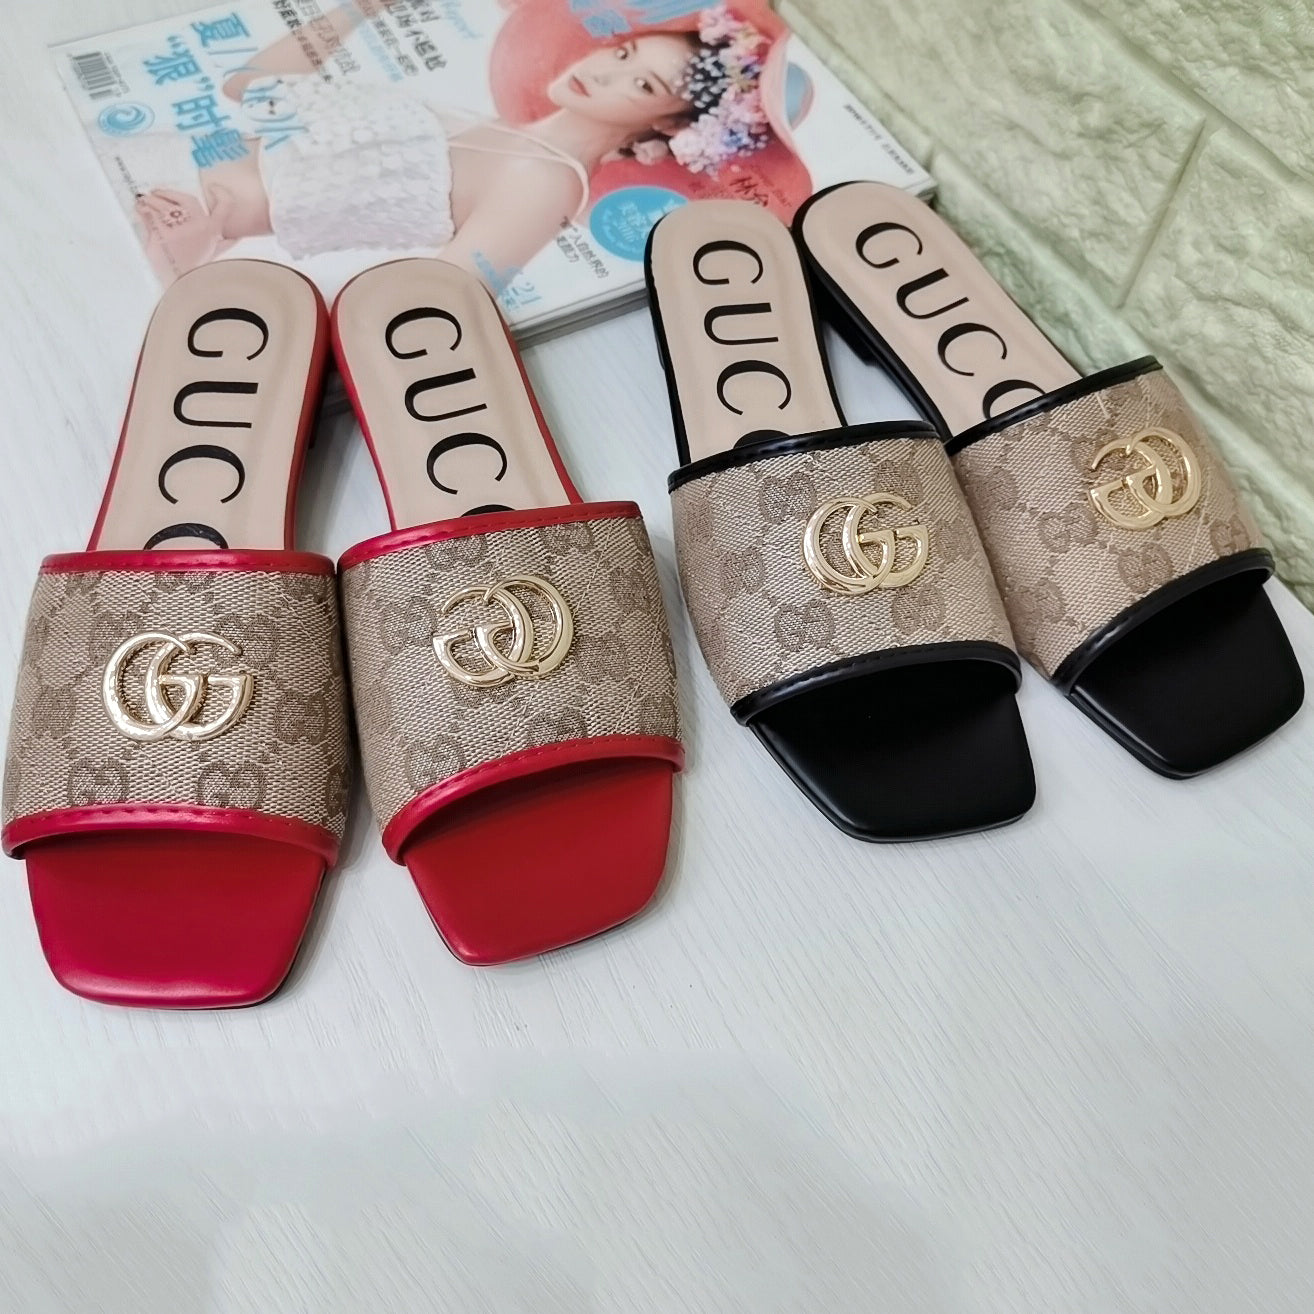 GG Fashion Men's and Women's Shoes Sandals Slippers